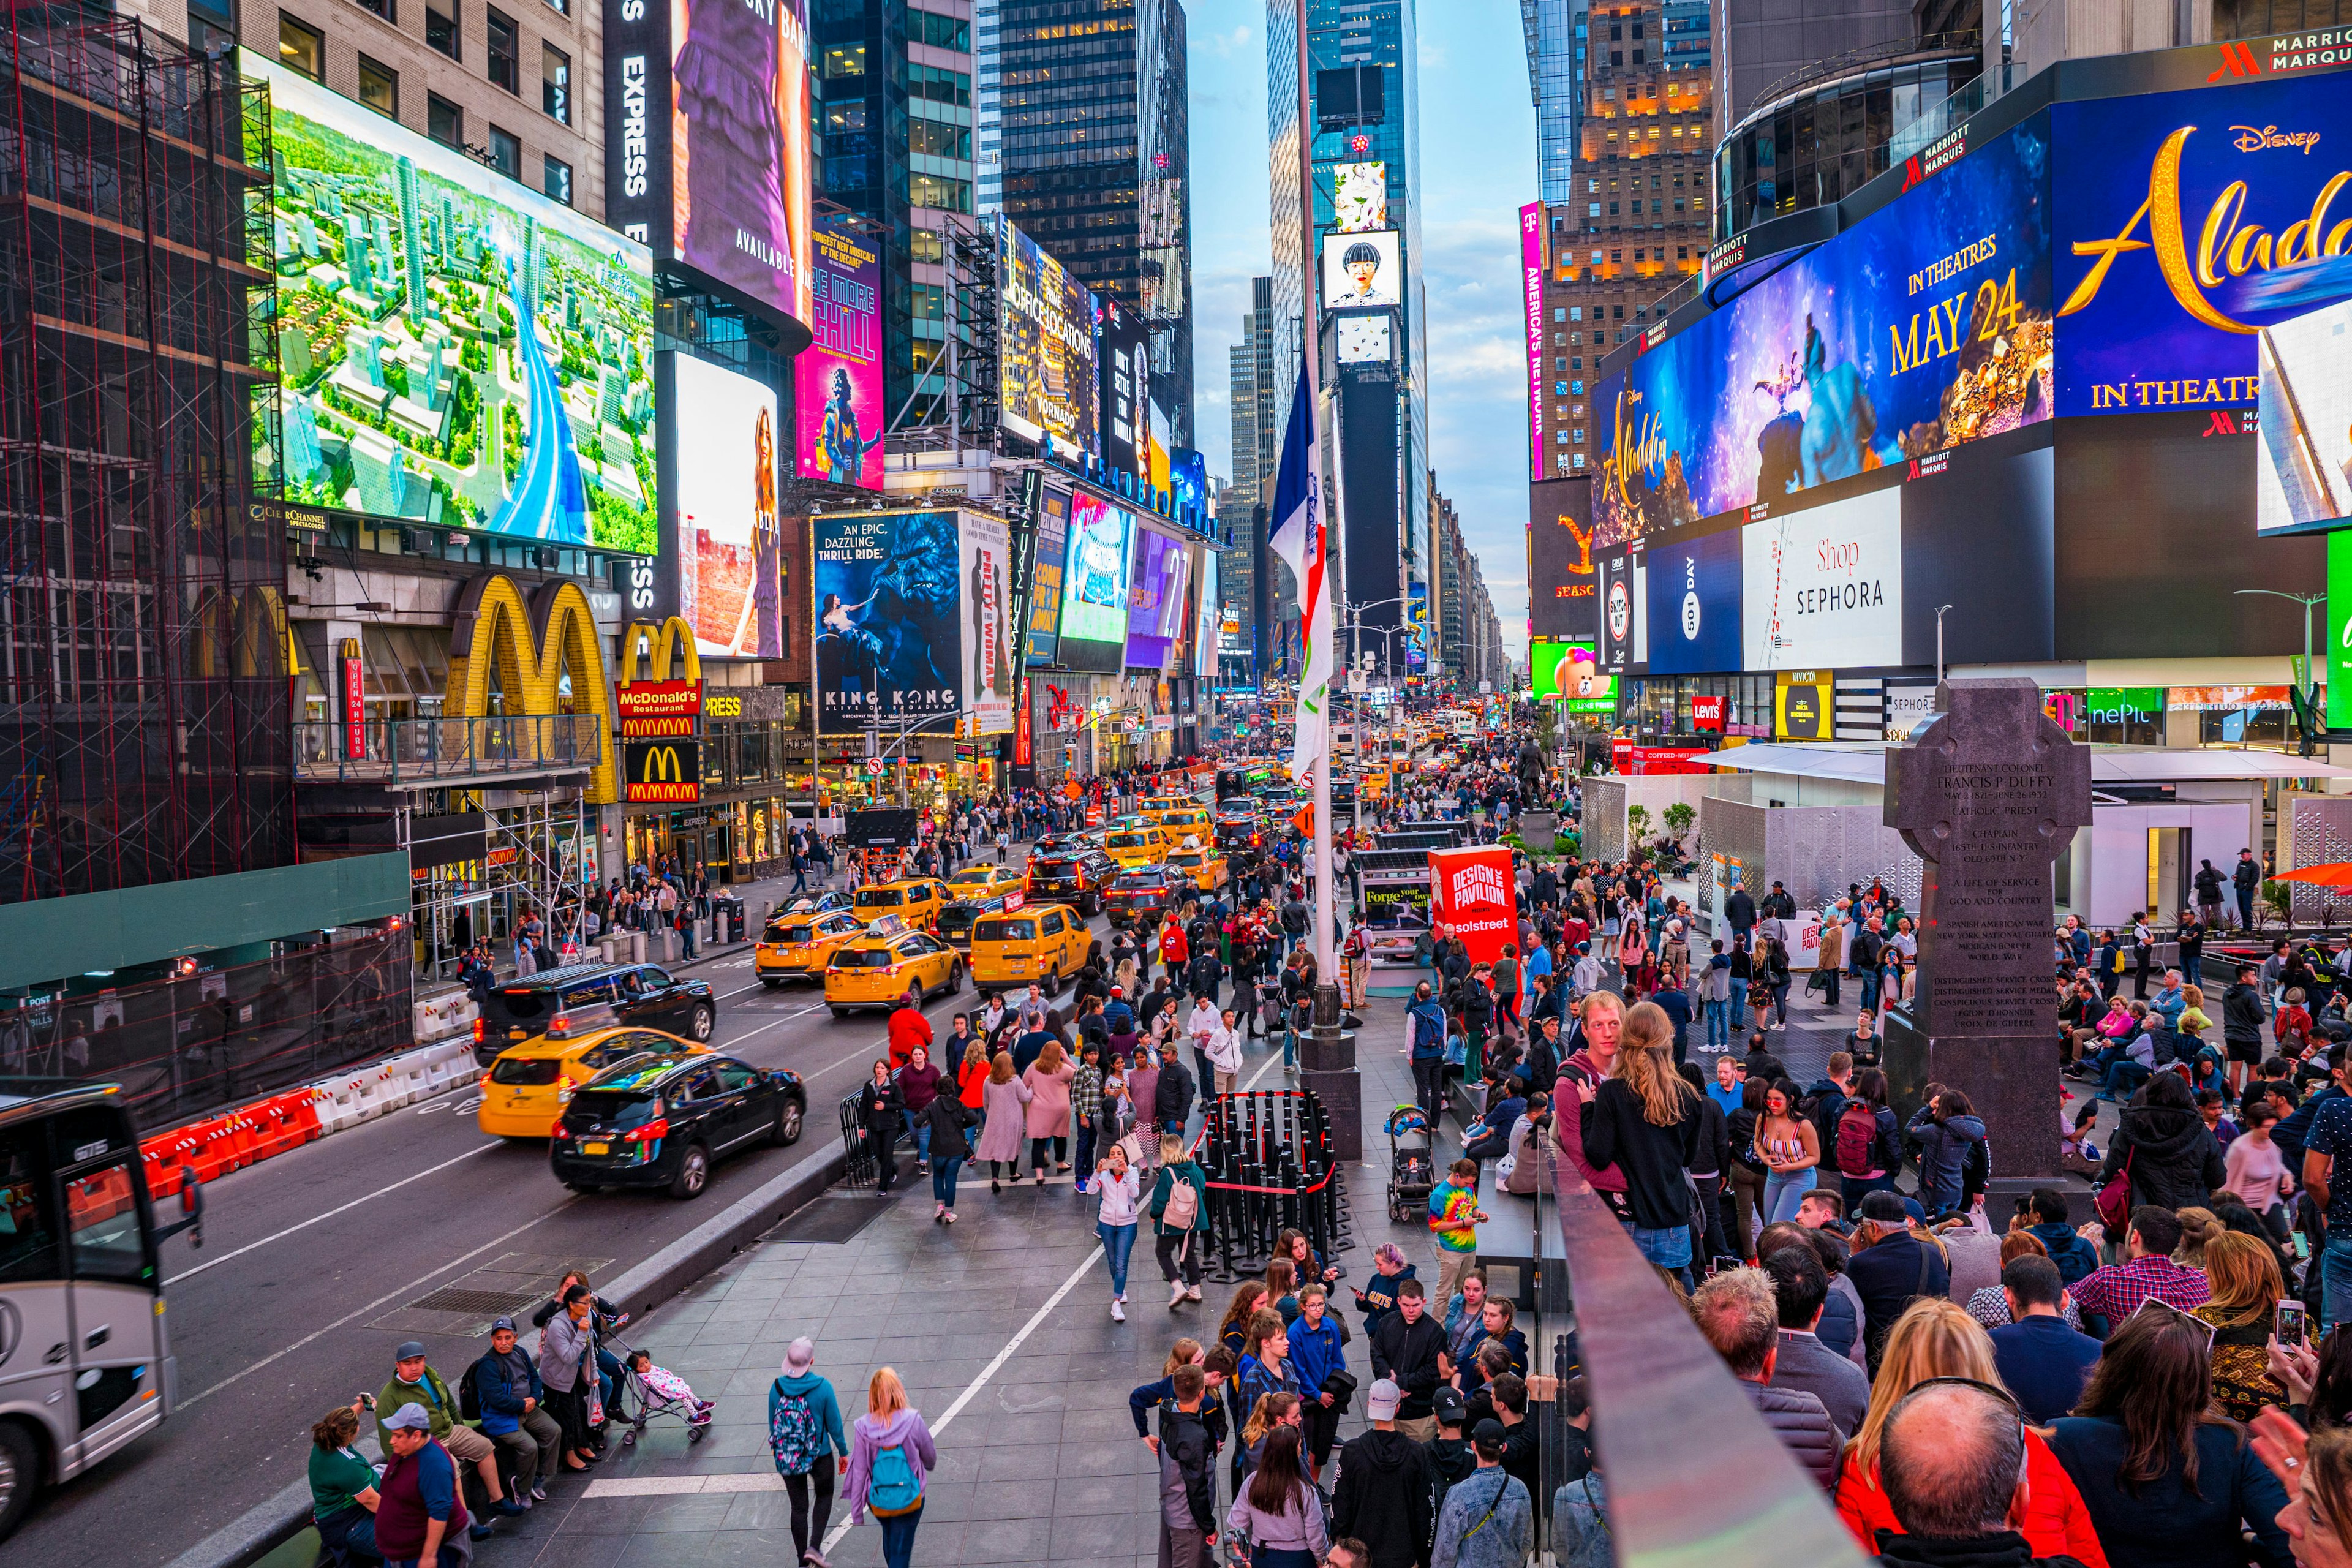 May 10, 2019: Time Square crowded in the early evening with pedestrians and traffic.